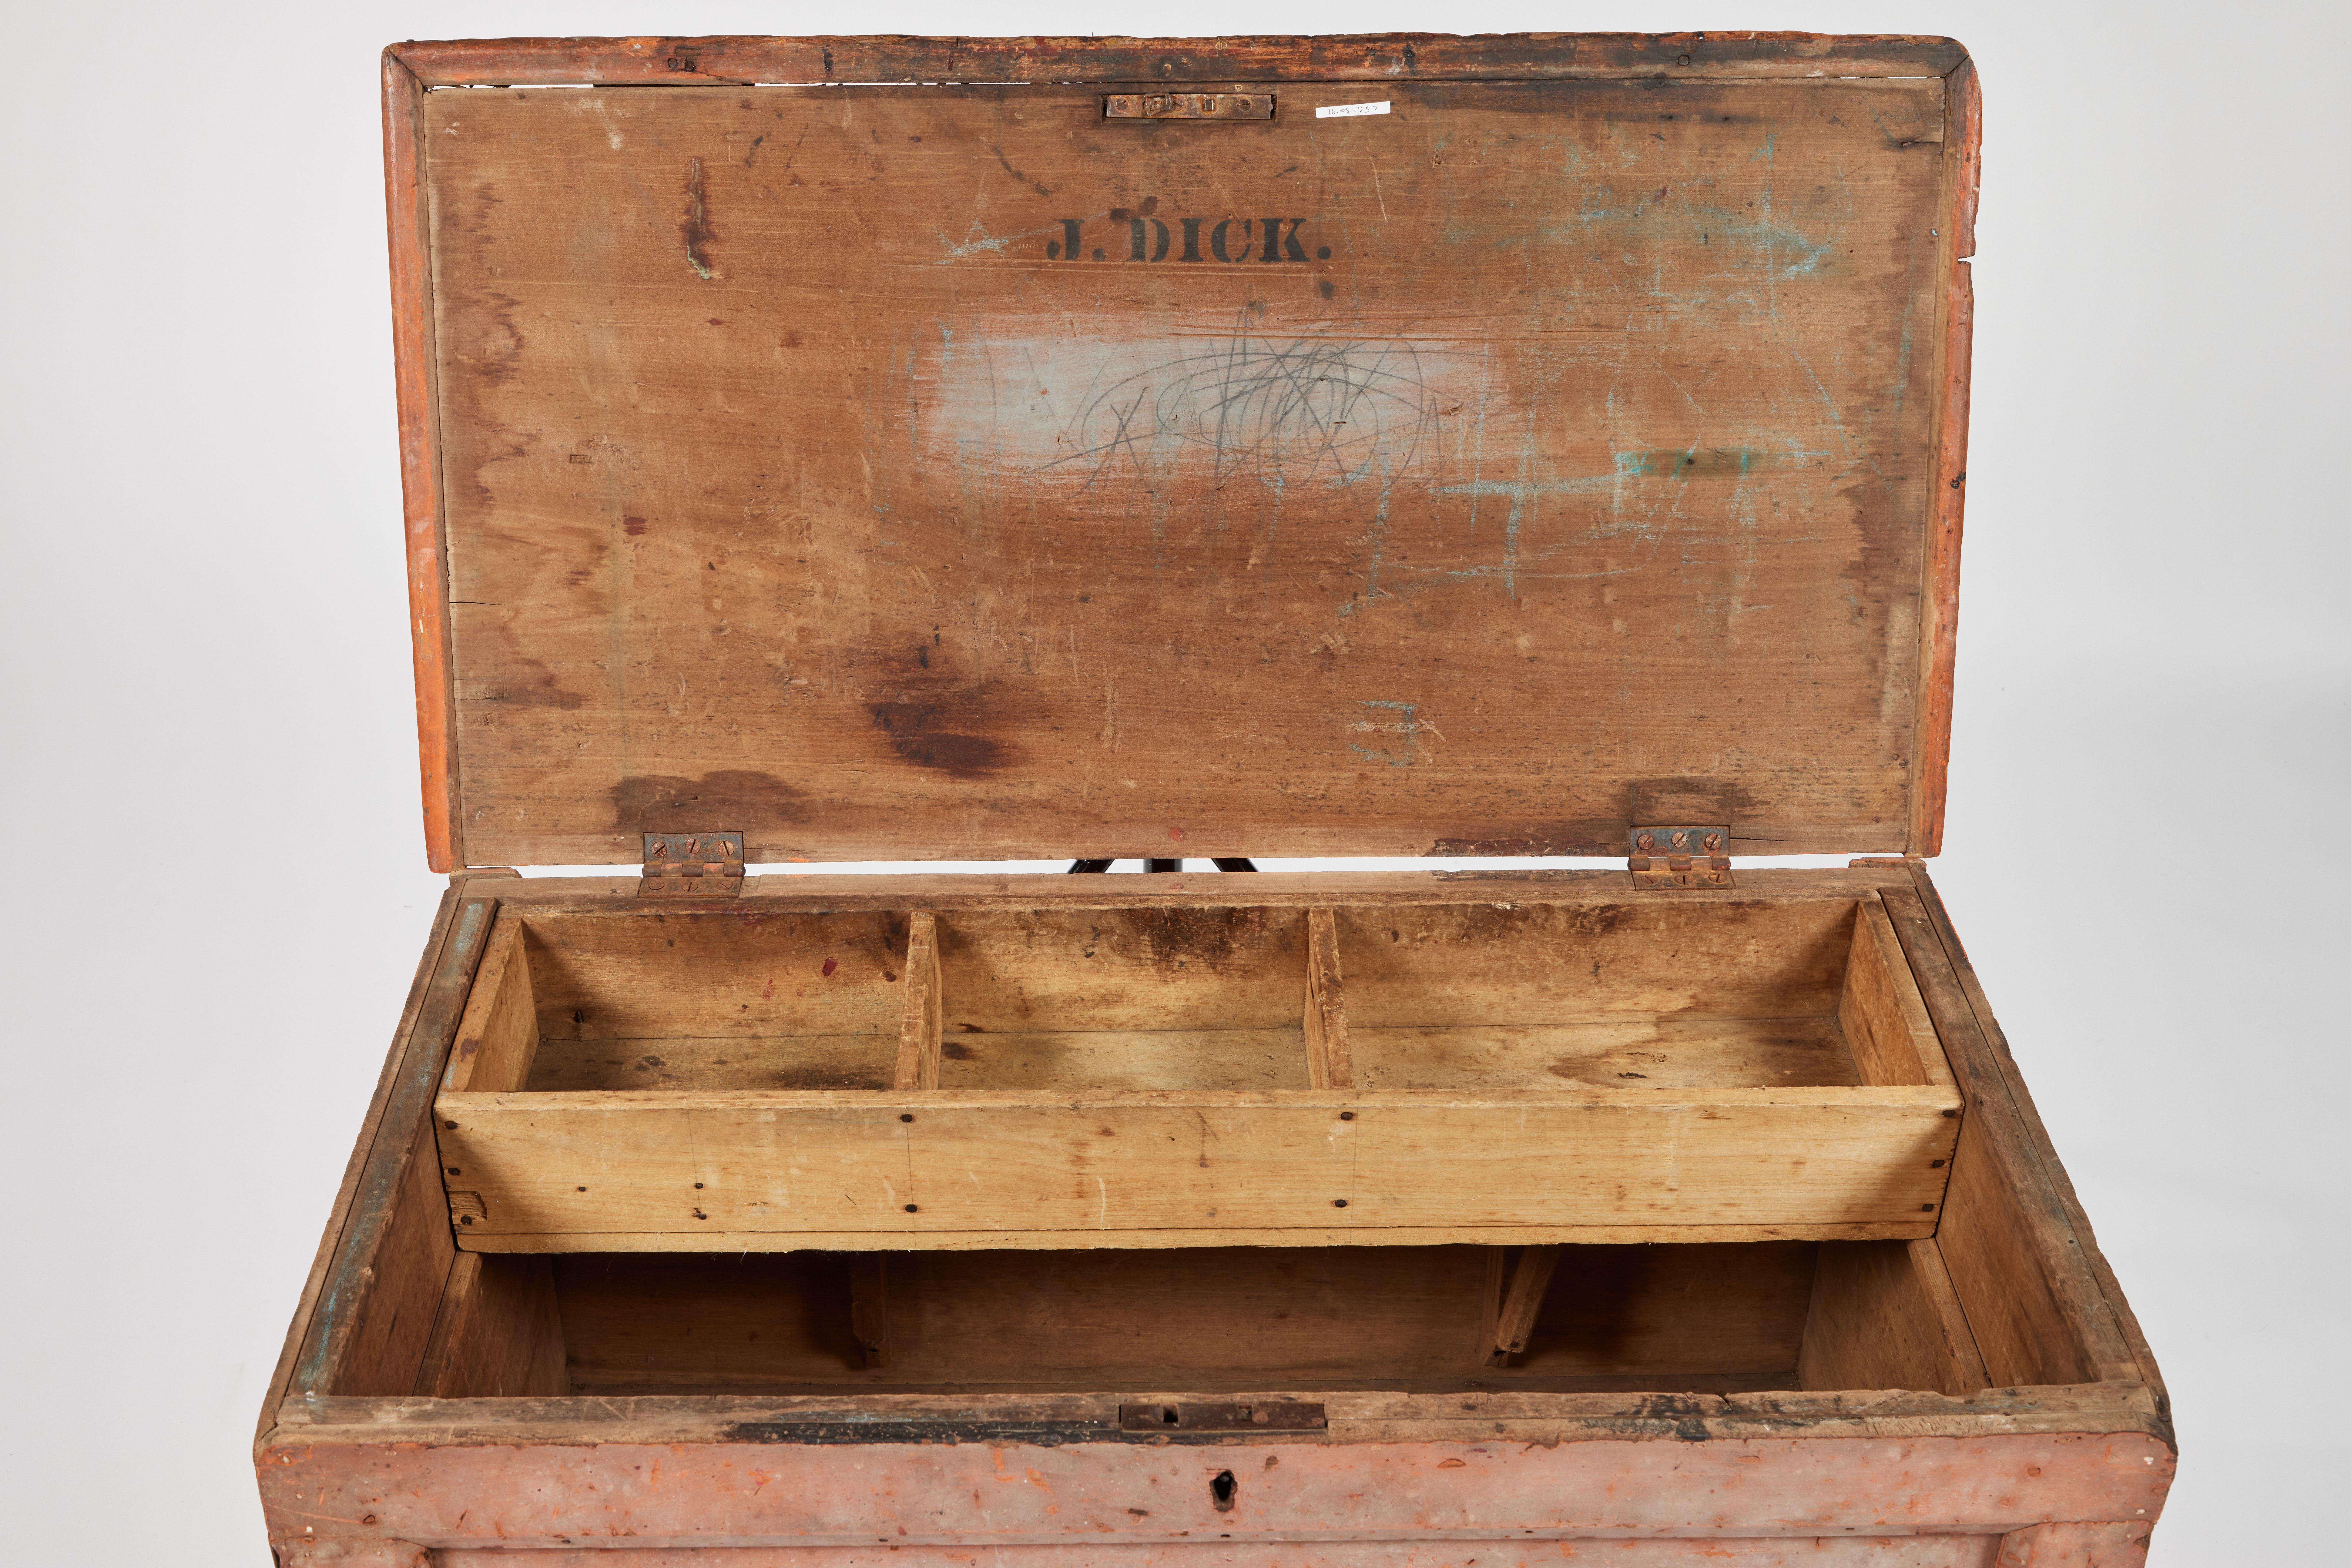 19th century English primitive trunk/blanket chest with original paint. The till, or candle tray, can be used to store smaller items, and there are some narrow compartments installed along the front interior. Underside of the lid is stamped, J.